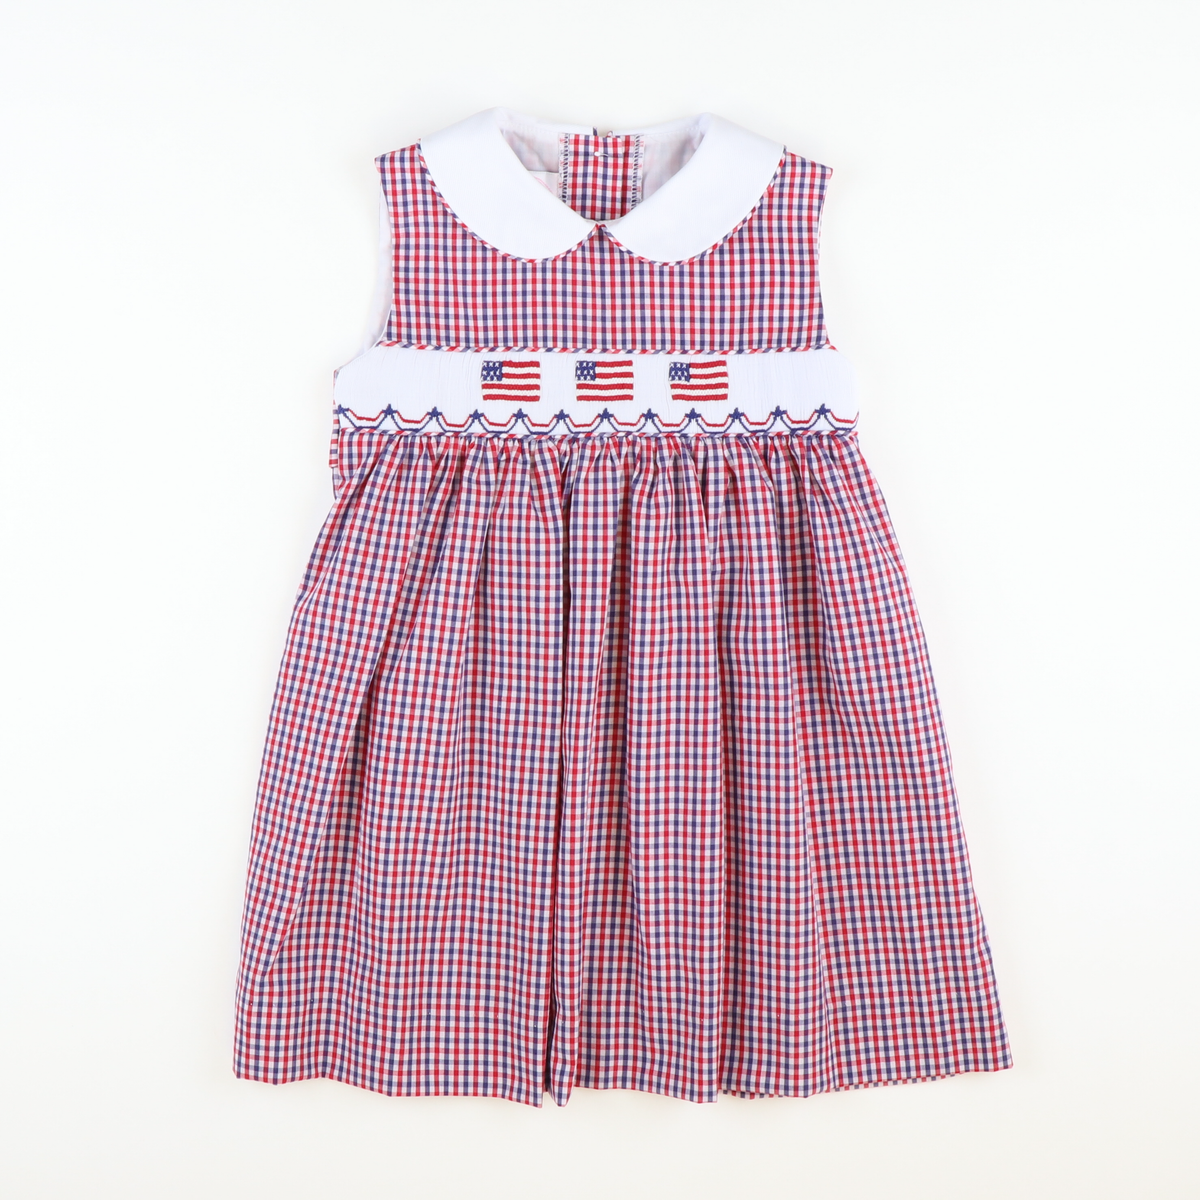 Smocked Liberty Collared Dress - Red and Blue Plaid - Stellybelly